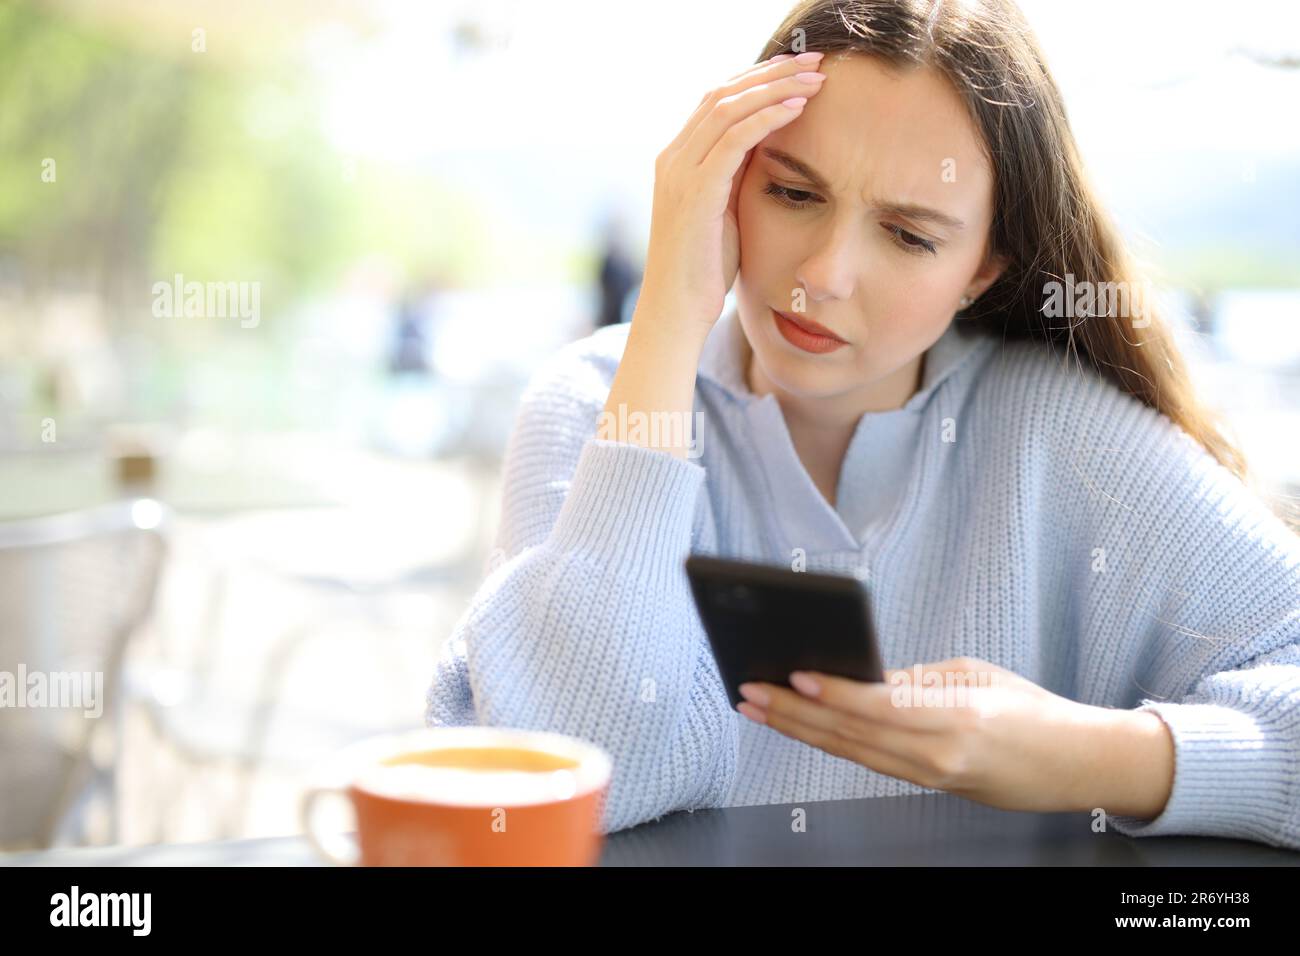 Worried woman checking phone sitting in a restaurant terrace a sunny day Stock Photo